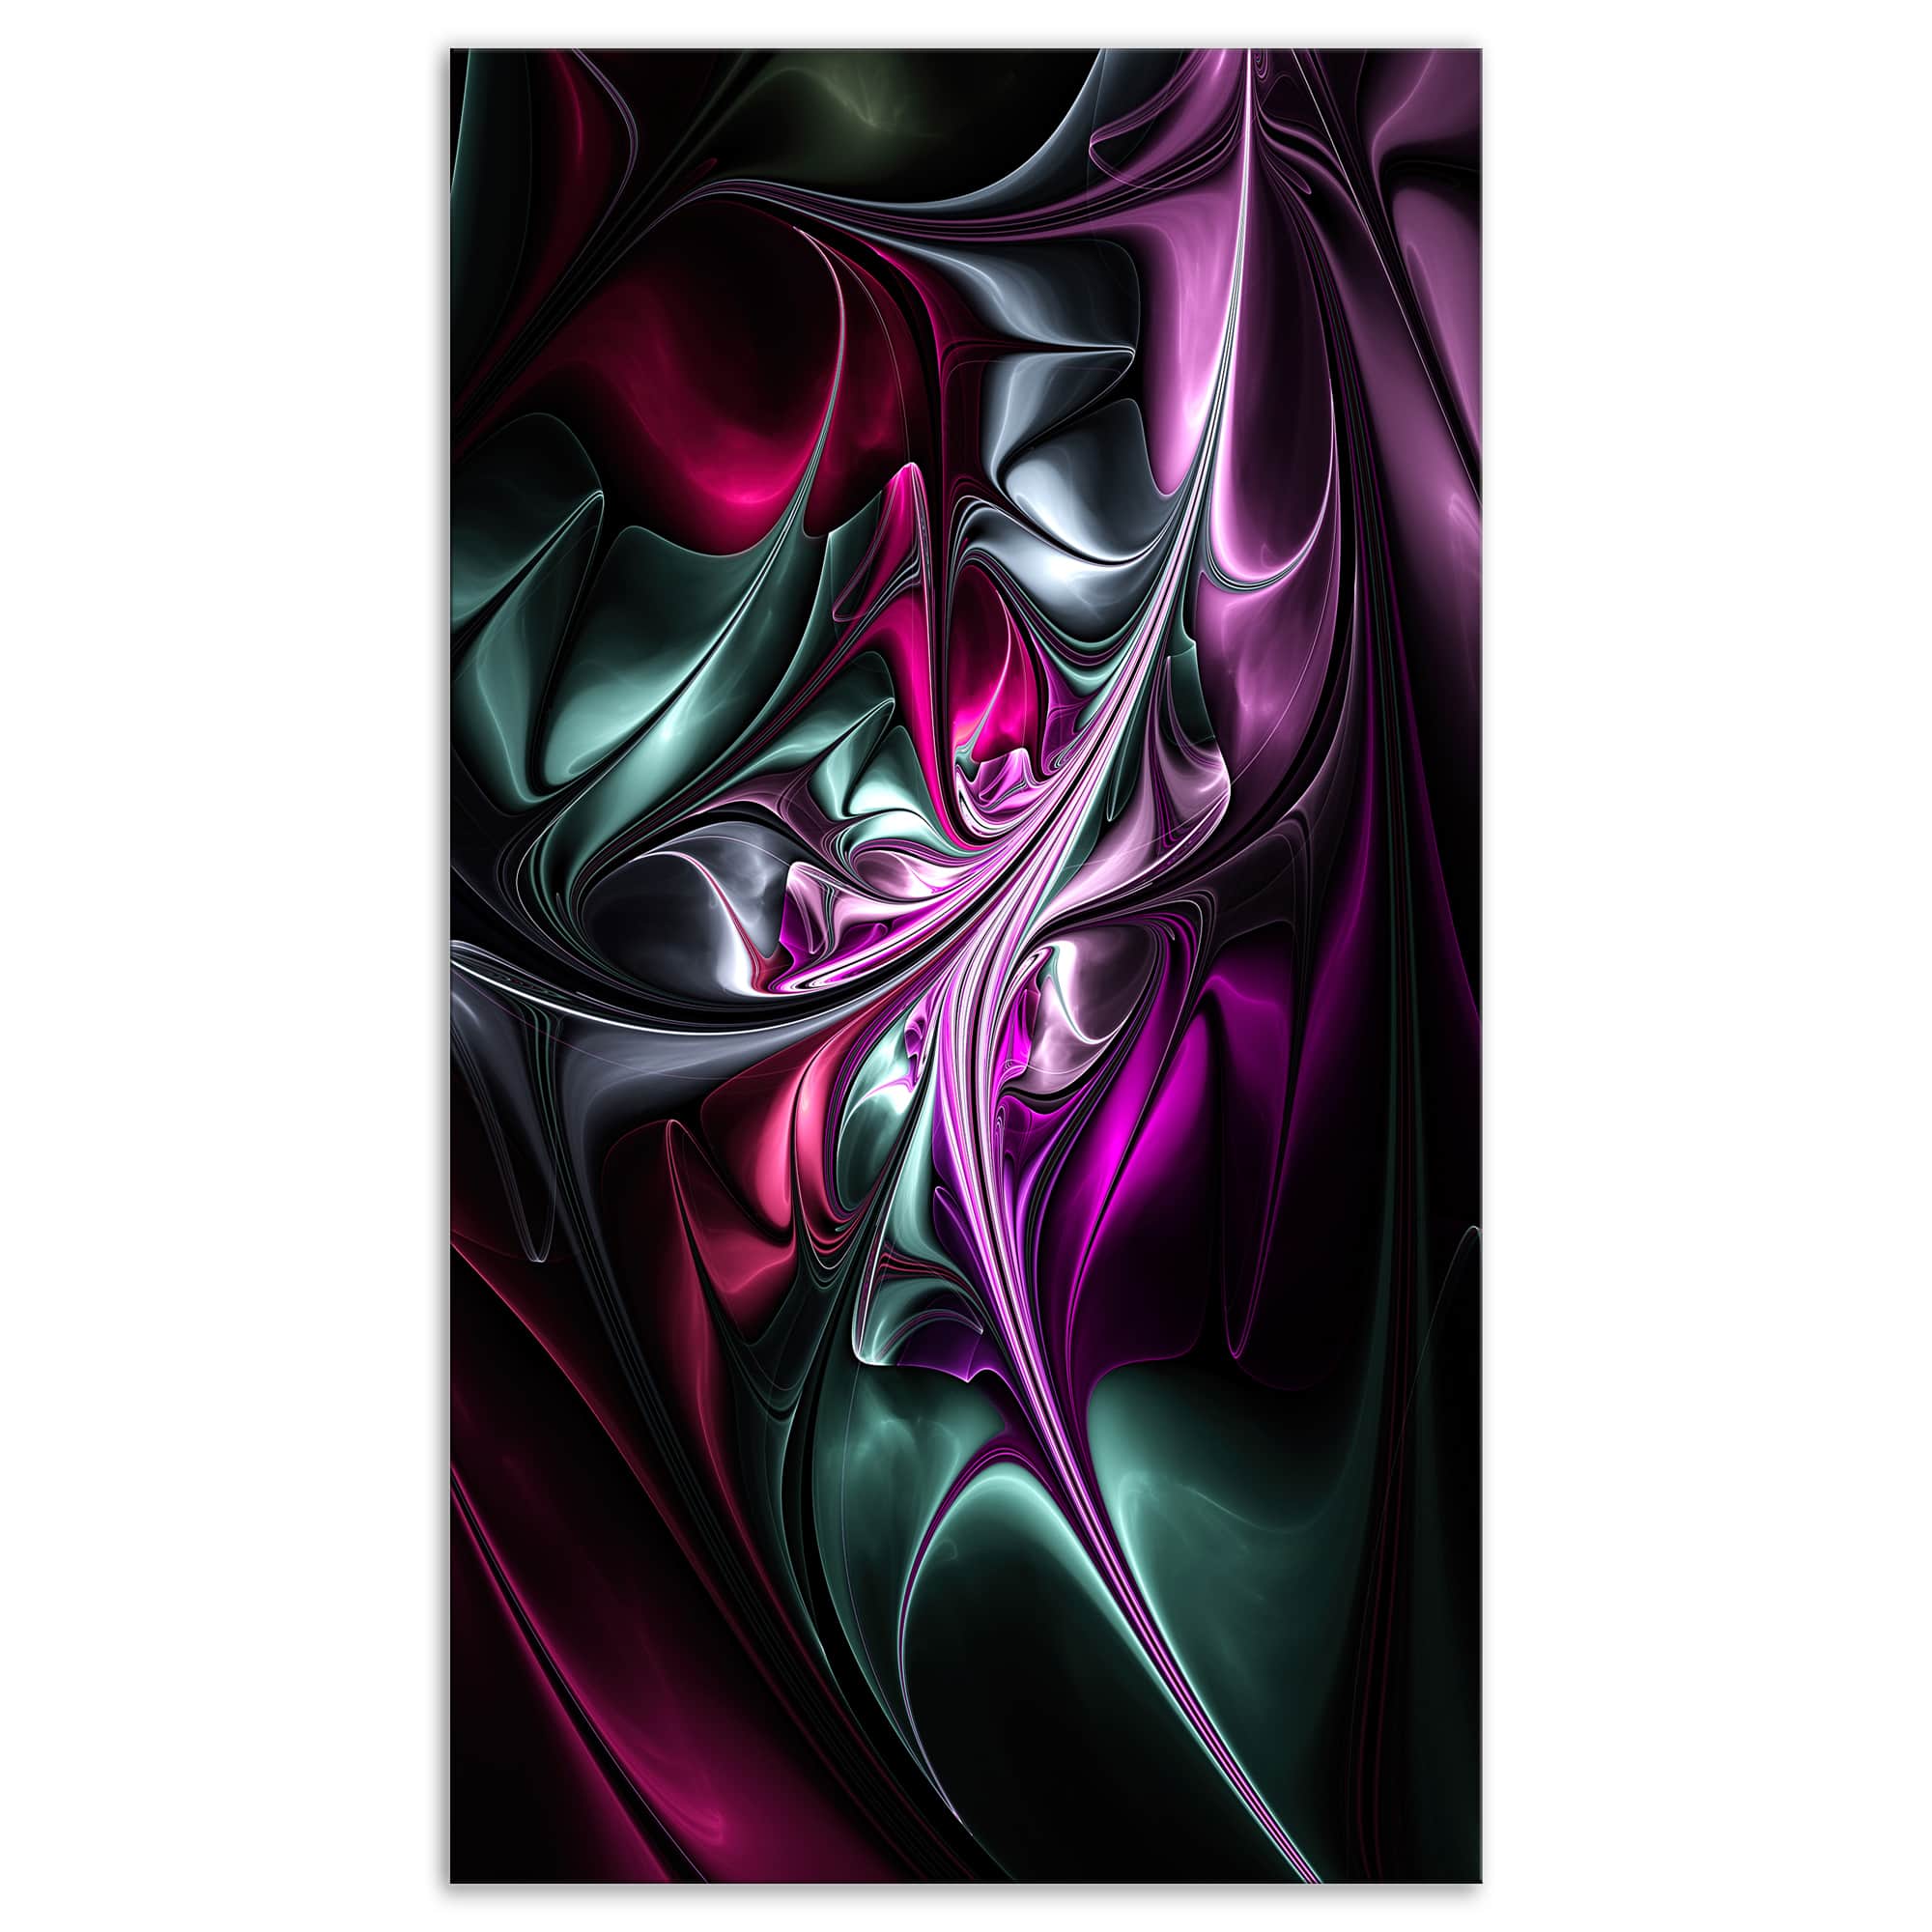 Designart - Multicolored Abstract Floral Shapes - Large Floral Wall Art Canvas